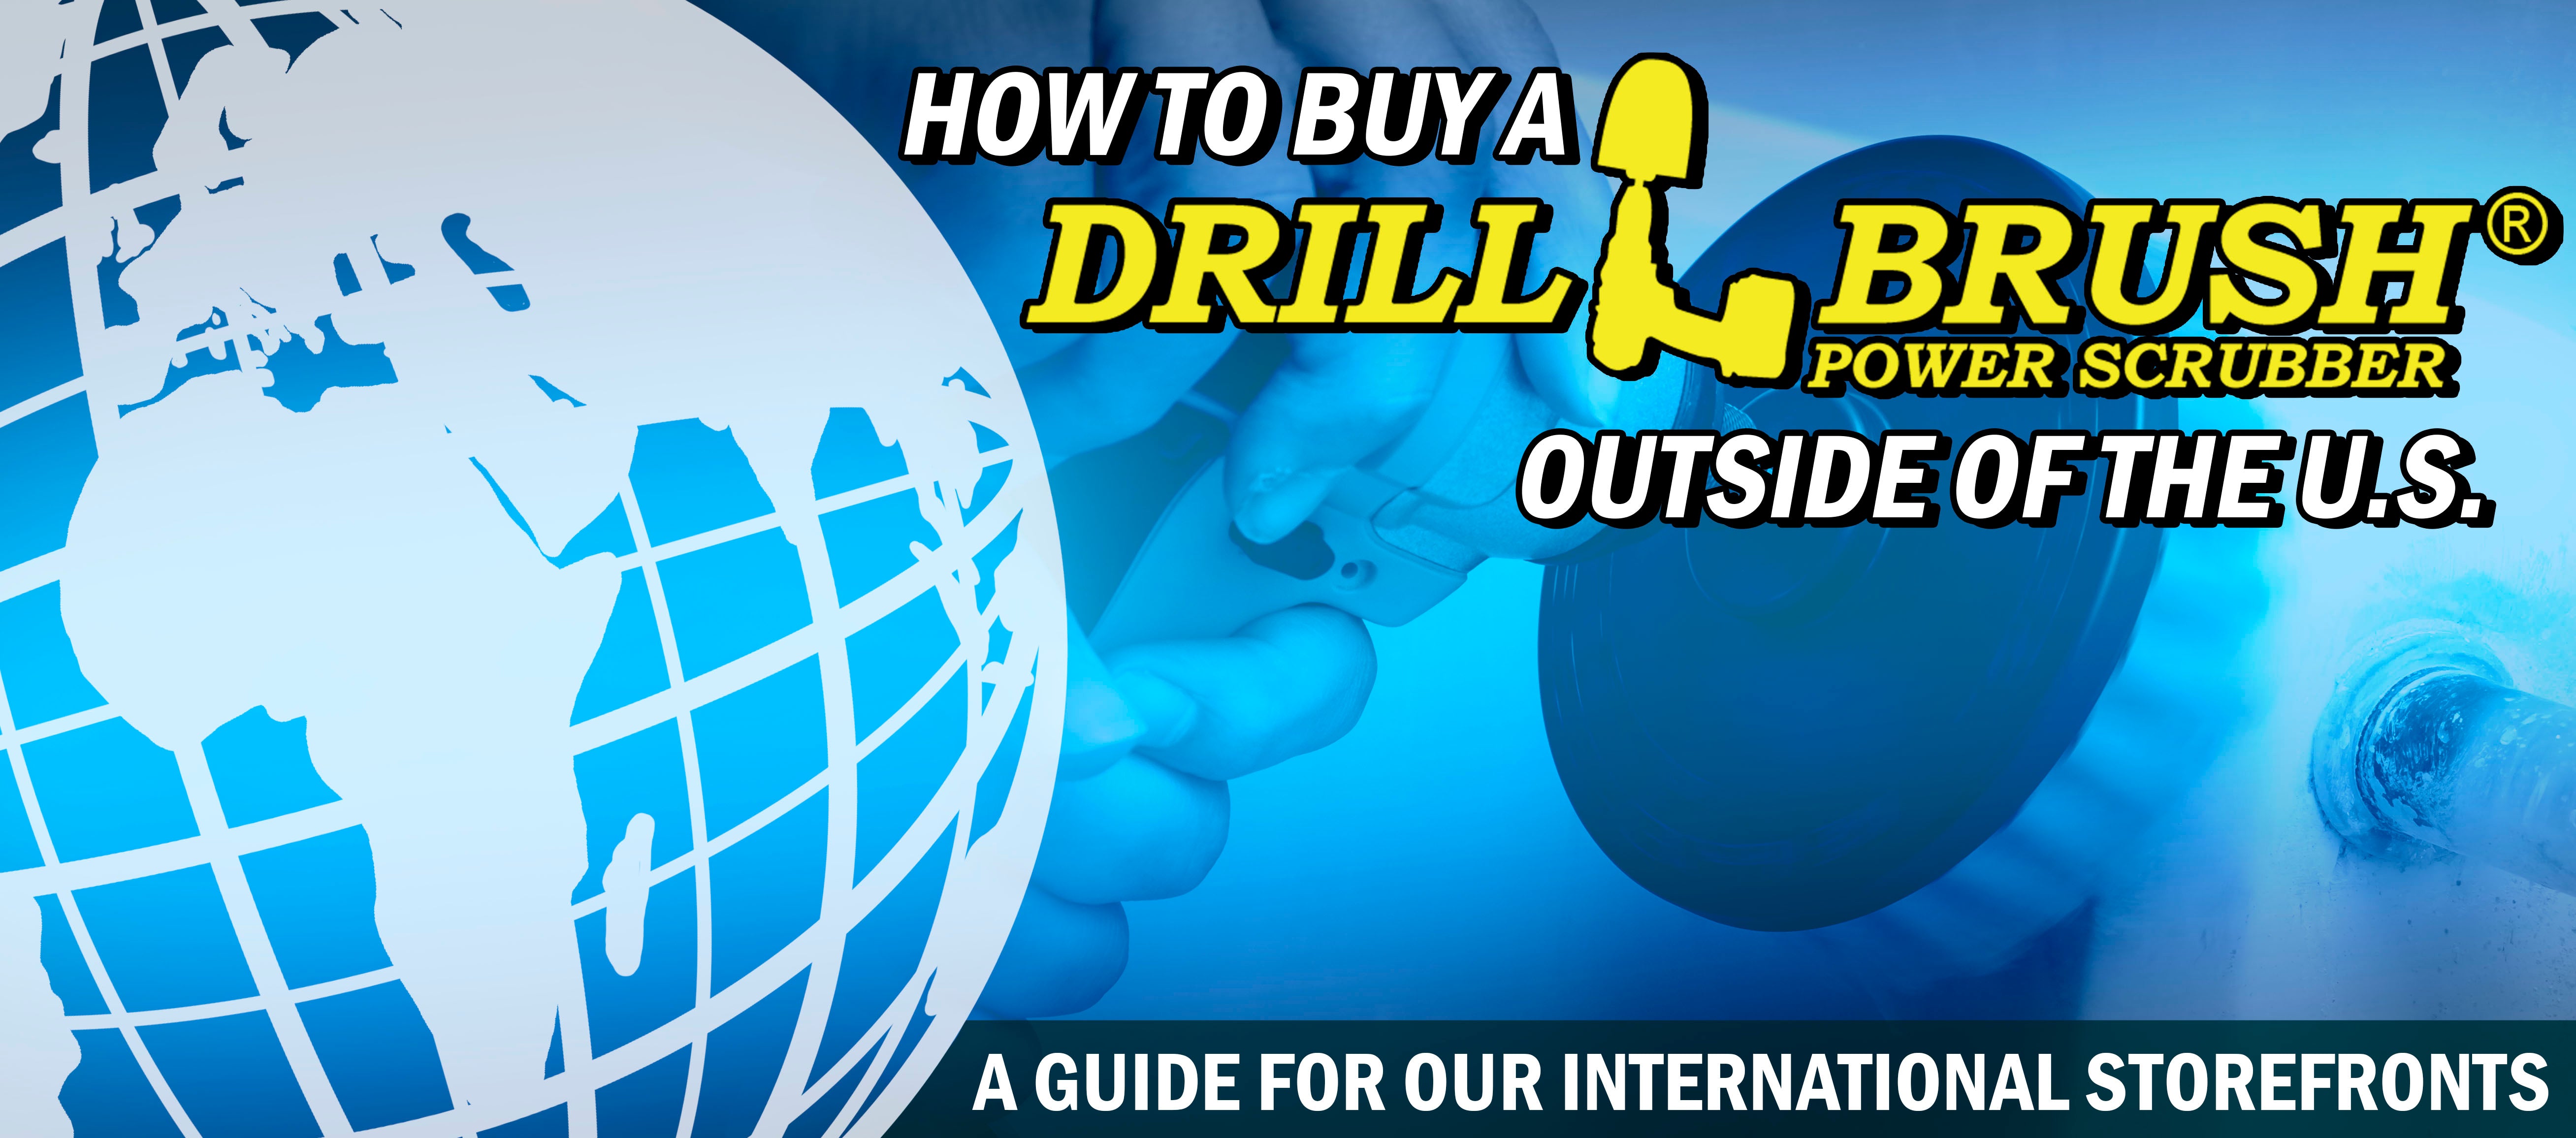 How to Buy A Drillbrush Power Scrubber Outside of the United States